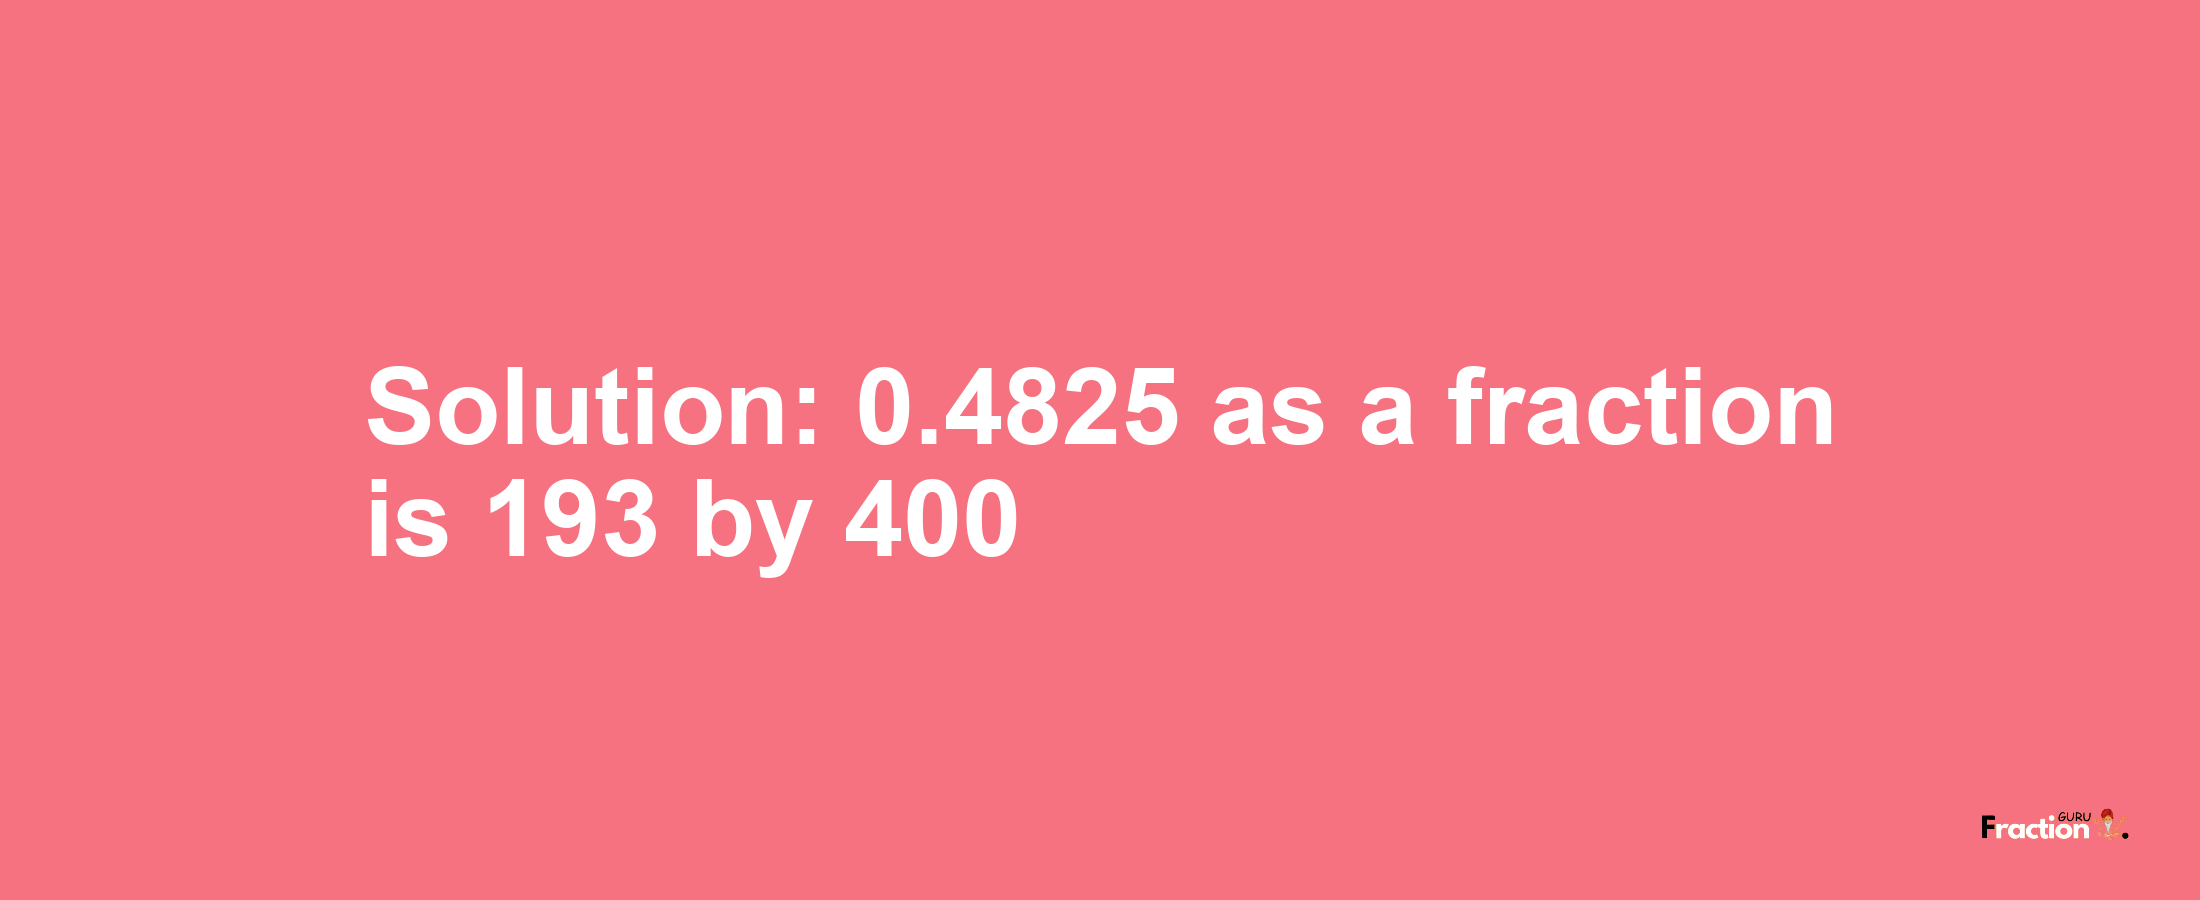 Solution:0.4825 as a fraction is 193/400